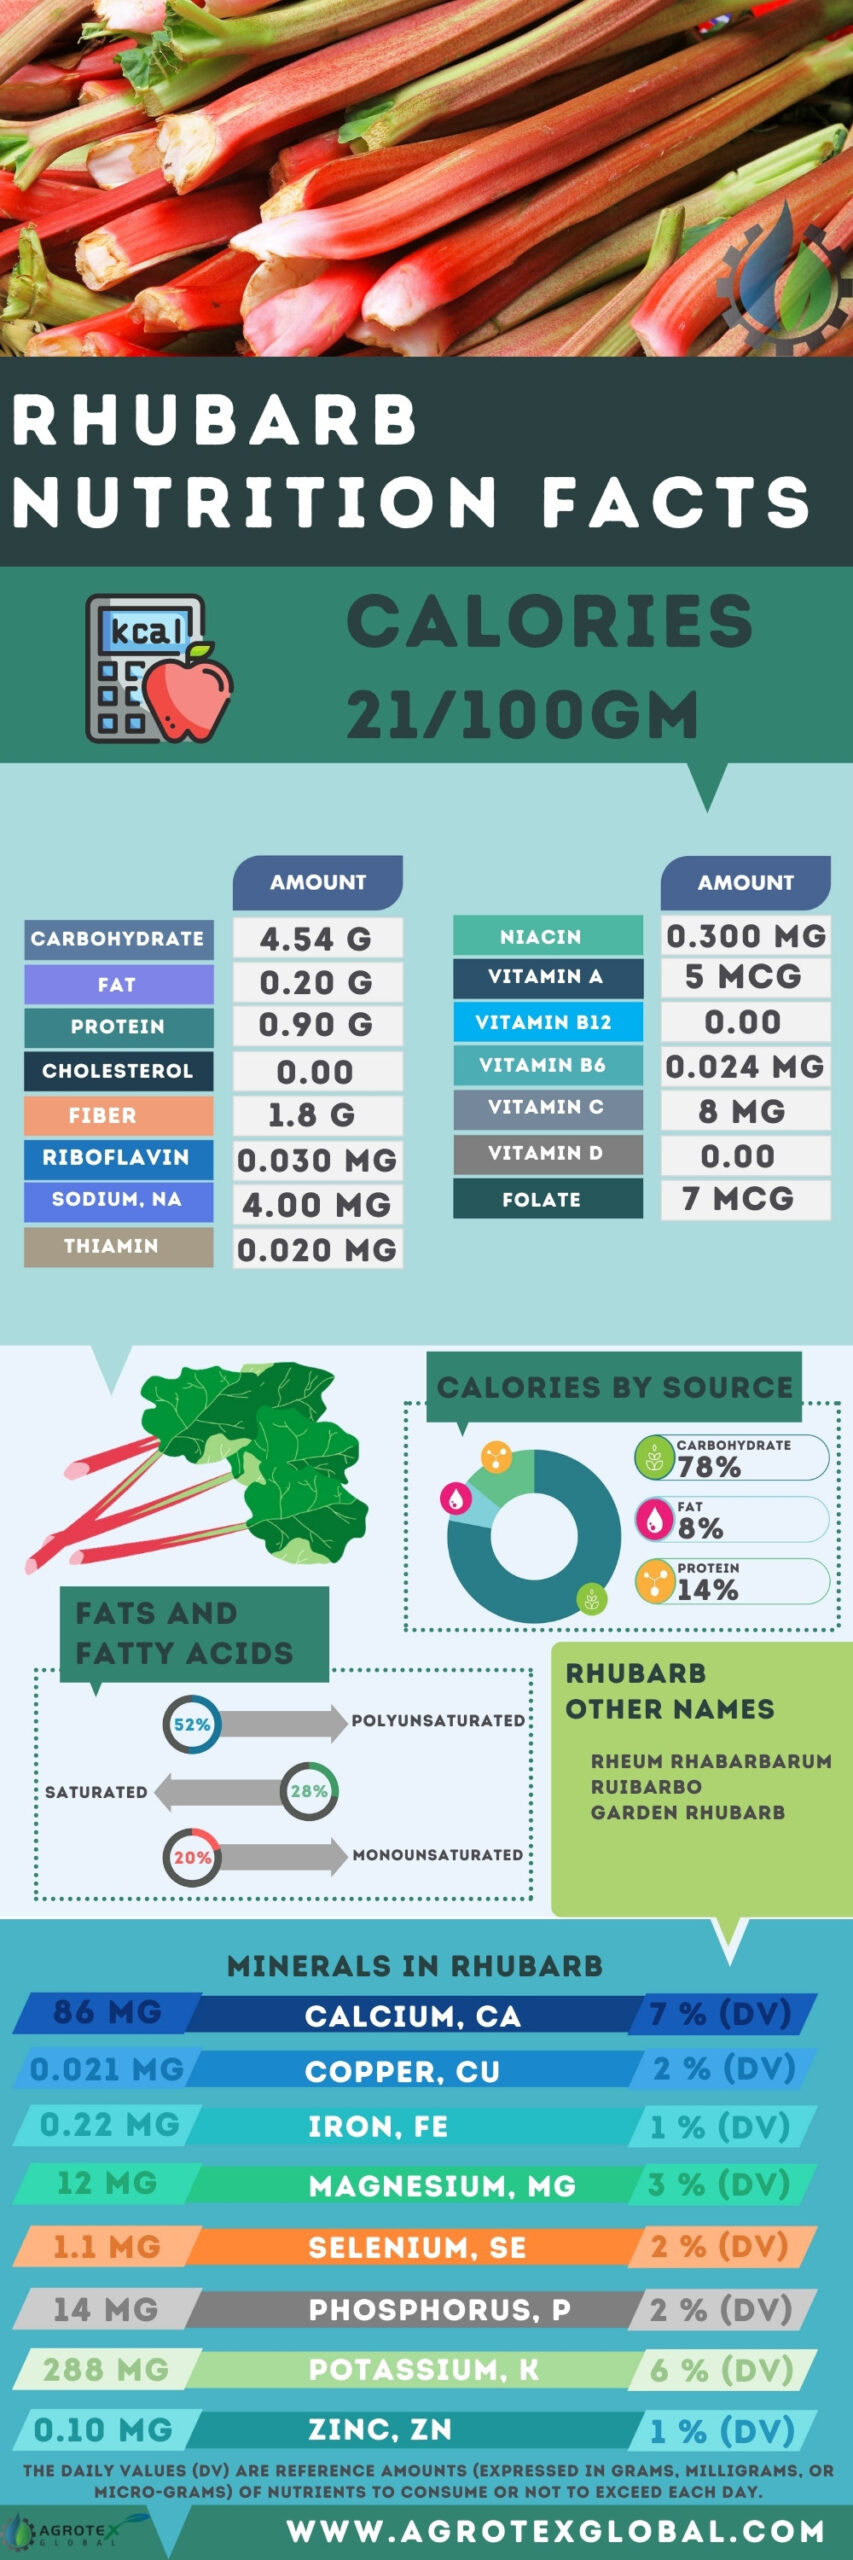 Rhubarb NUTRITION FACTS calorie chart infographic